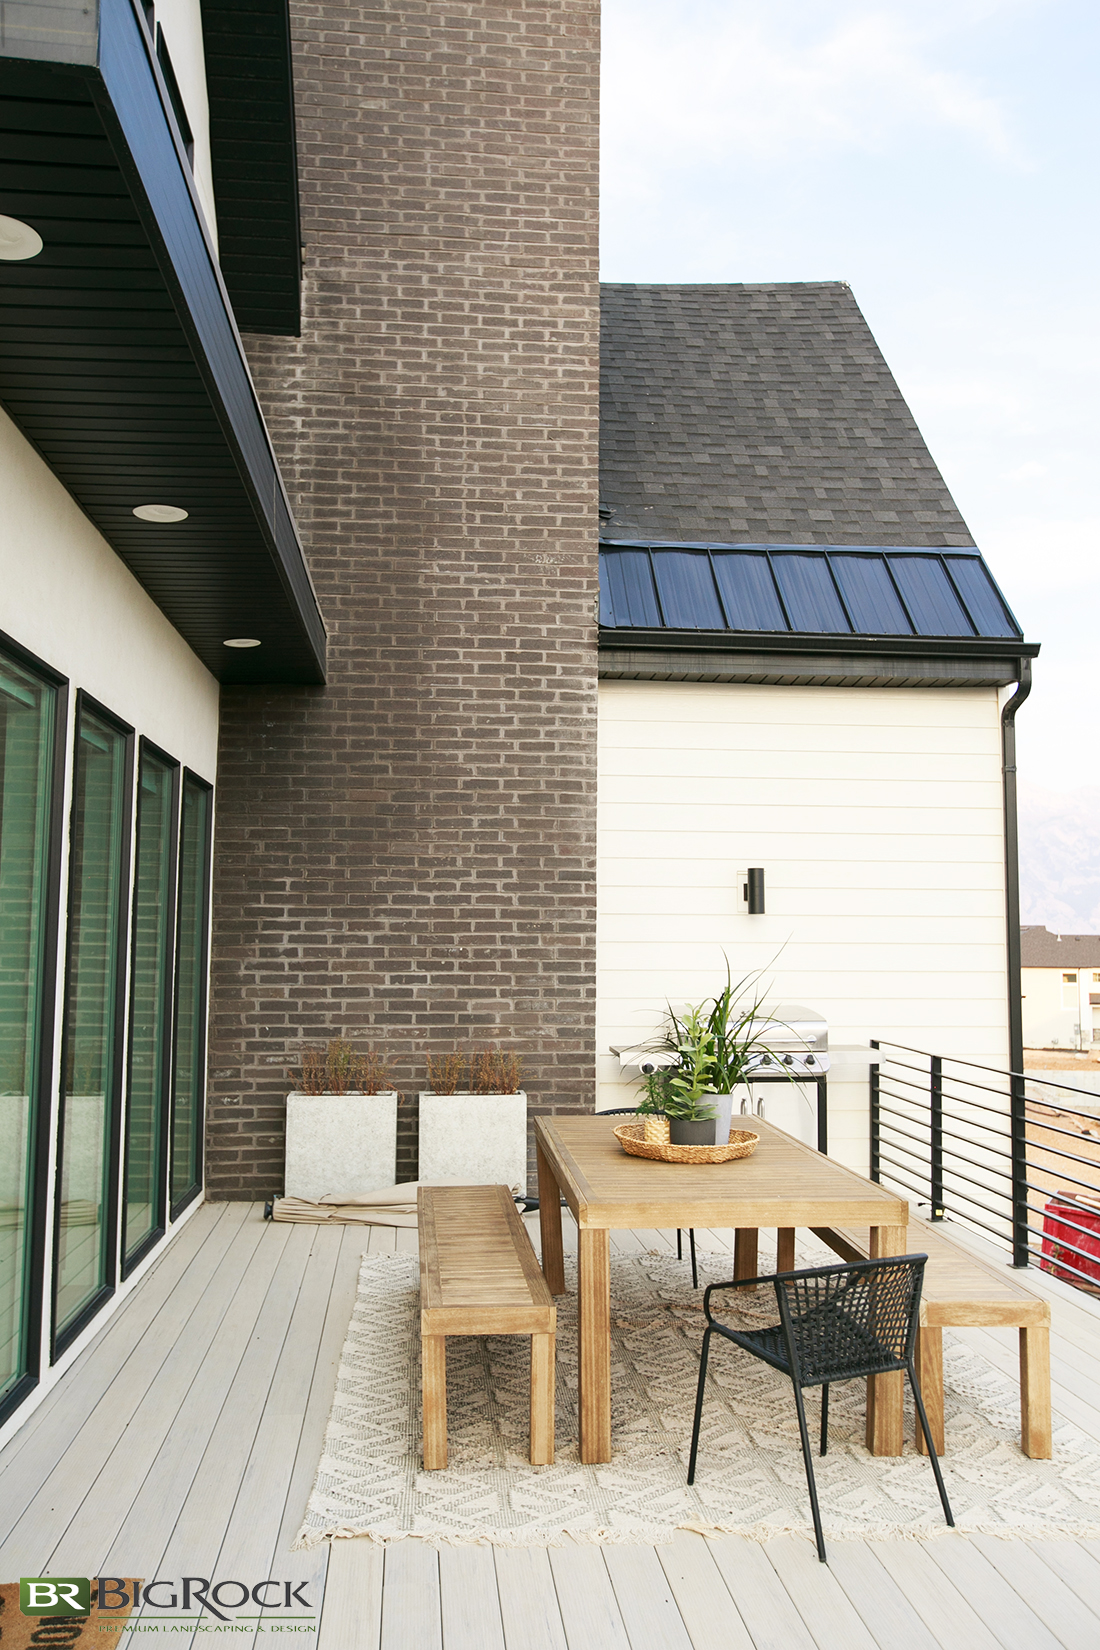 Expand your outdoor living experience with an attached deck. Bring nature to your with potted plants and foliage.